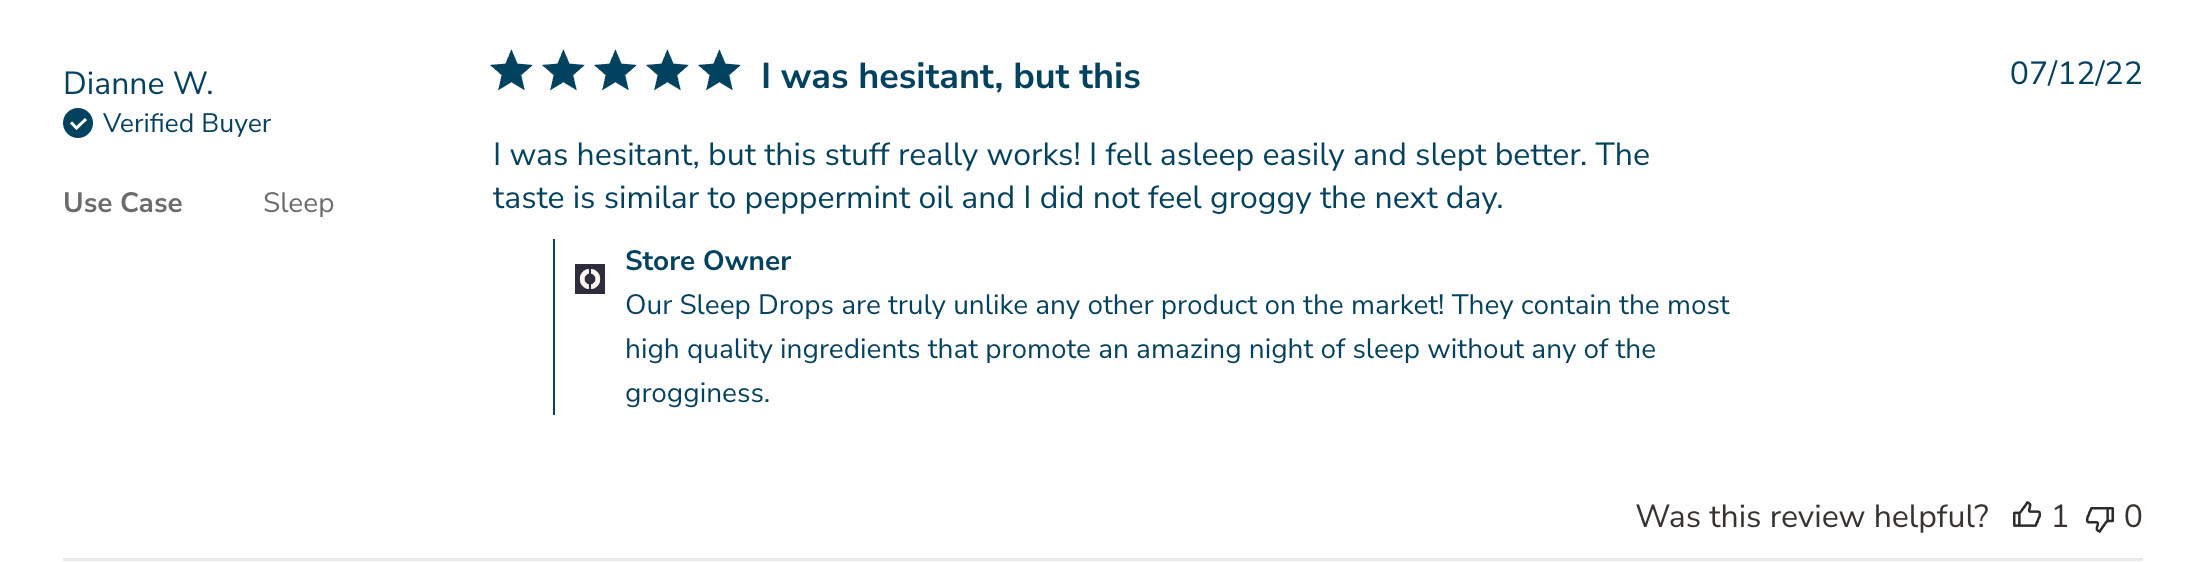 5 star review by Dianne W.: I was hesitant, but this stuff really works! I fell asleep easily and slept better. The taste is similar to peppermint oil and I did not feel groggy the next day.